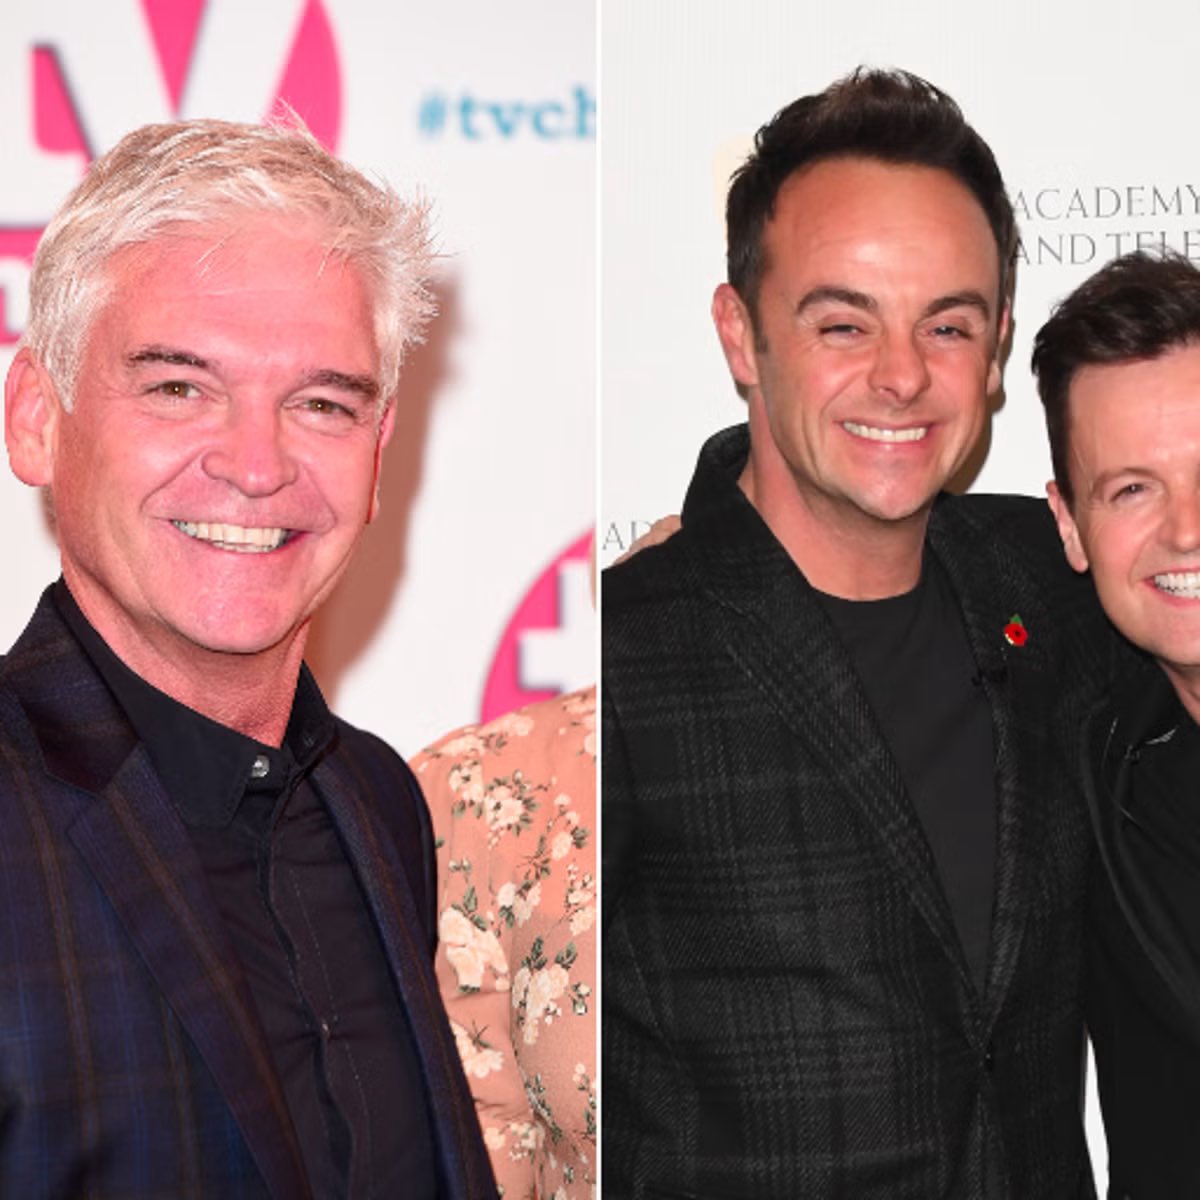 Mind, this is the same company who kept Ant McPartlin and Phillip Schofield employed despite their evil ways. The only award ITV would win is for comedy cause of all their clownery.